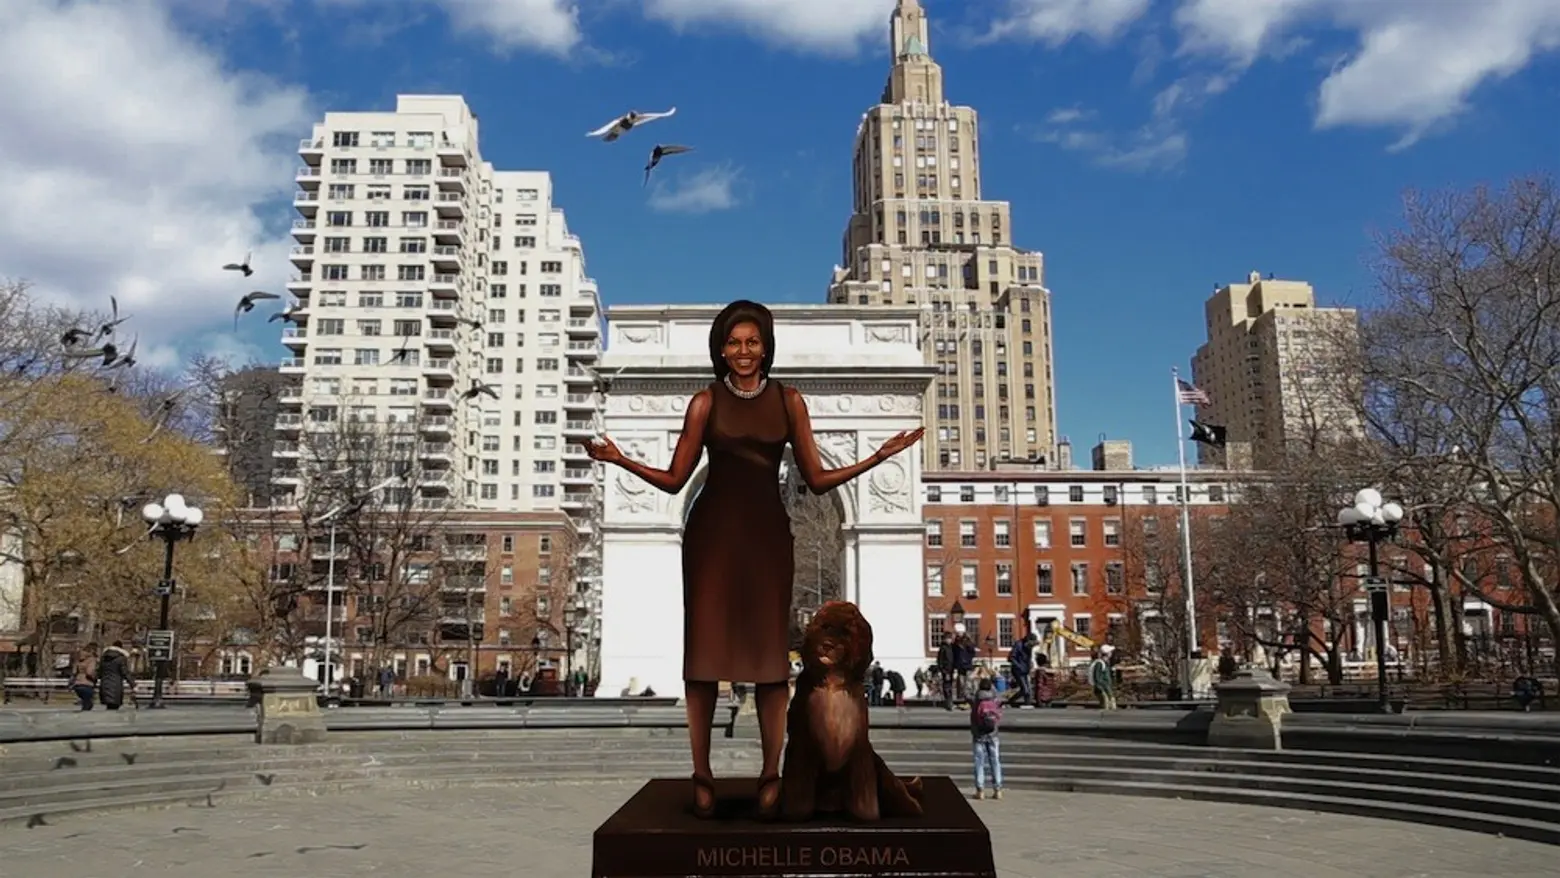 Artists plan to install eight life-size sculptures of powerful women across New York